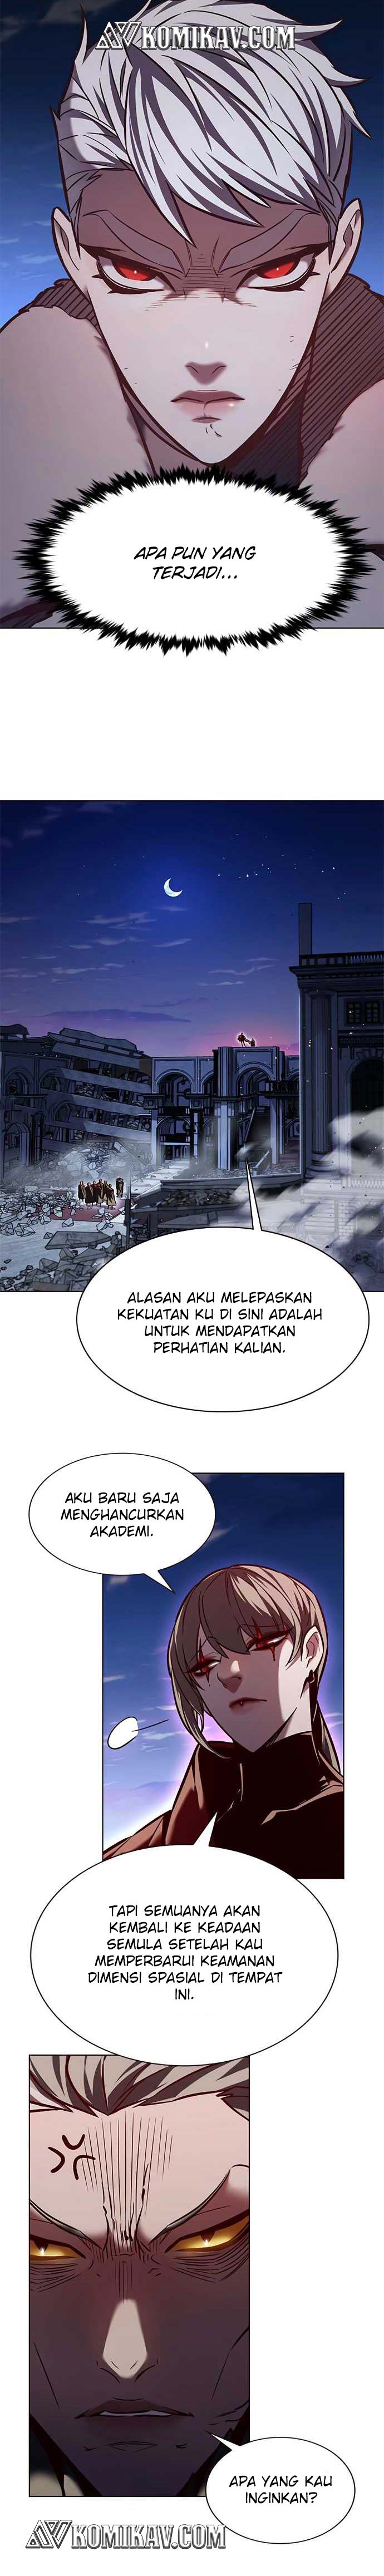 Eleceed Chapter 220